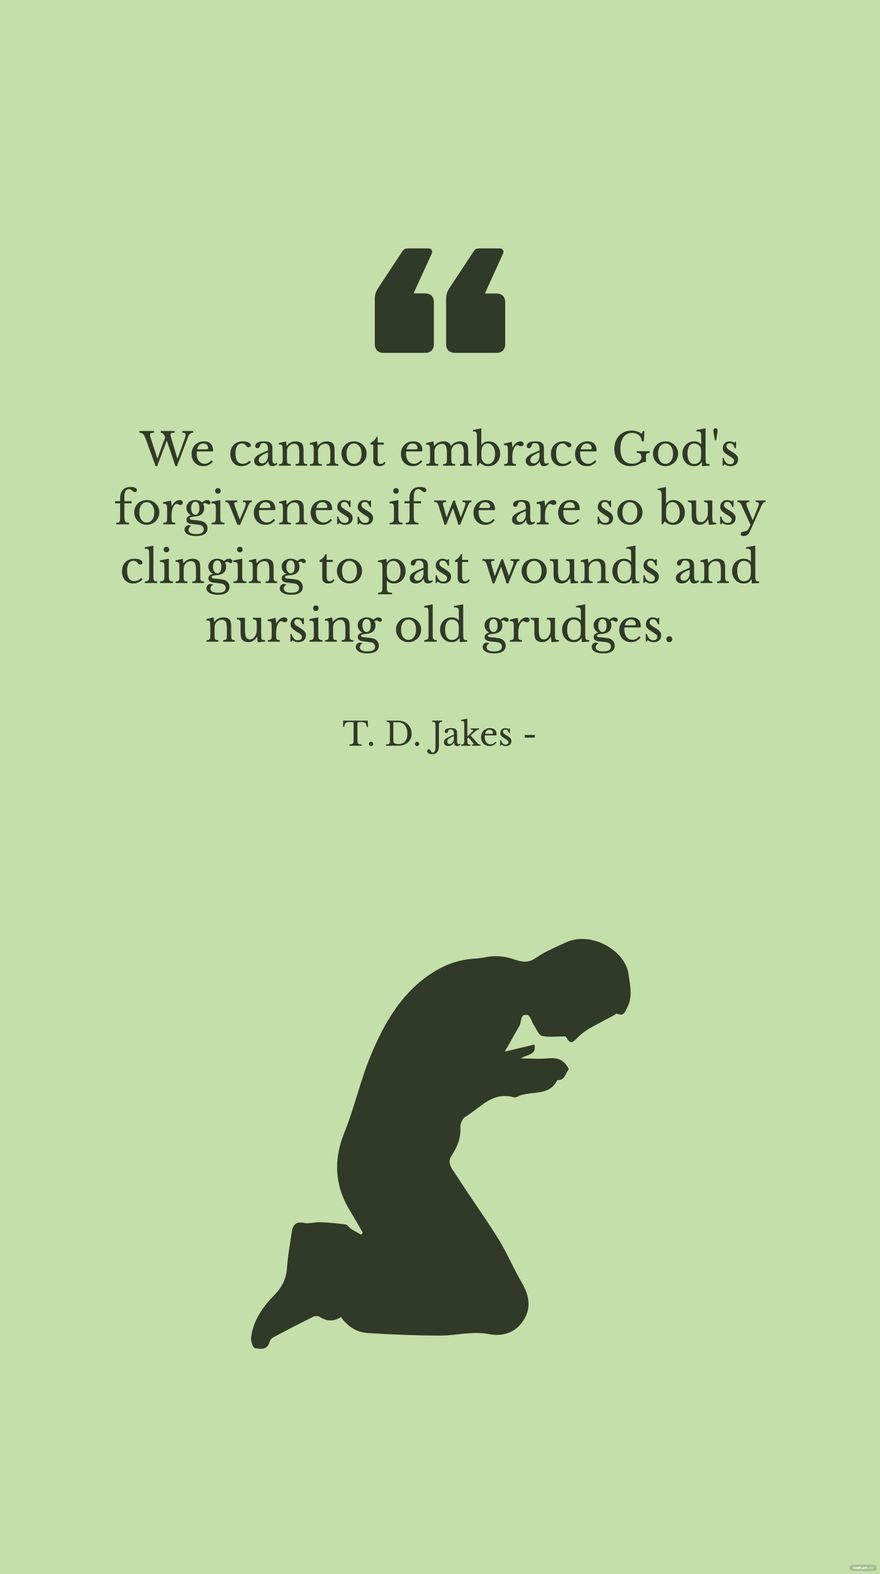 Free T. D. Jakes - We cannot embrace God's forgiveness if we are so busy clinging to past wounds and nursing old grudges. in JPG